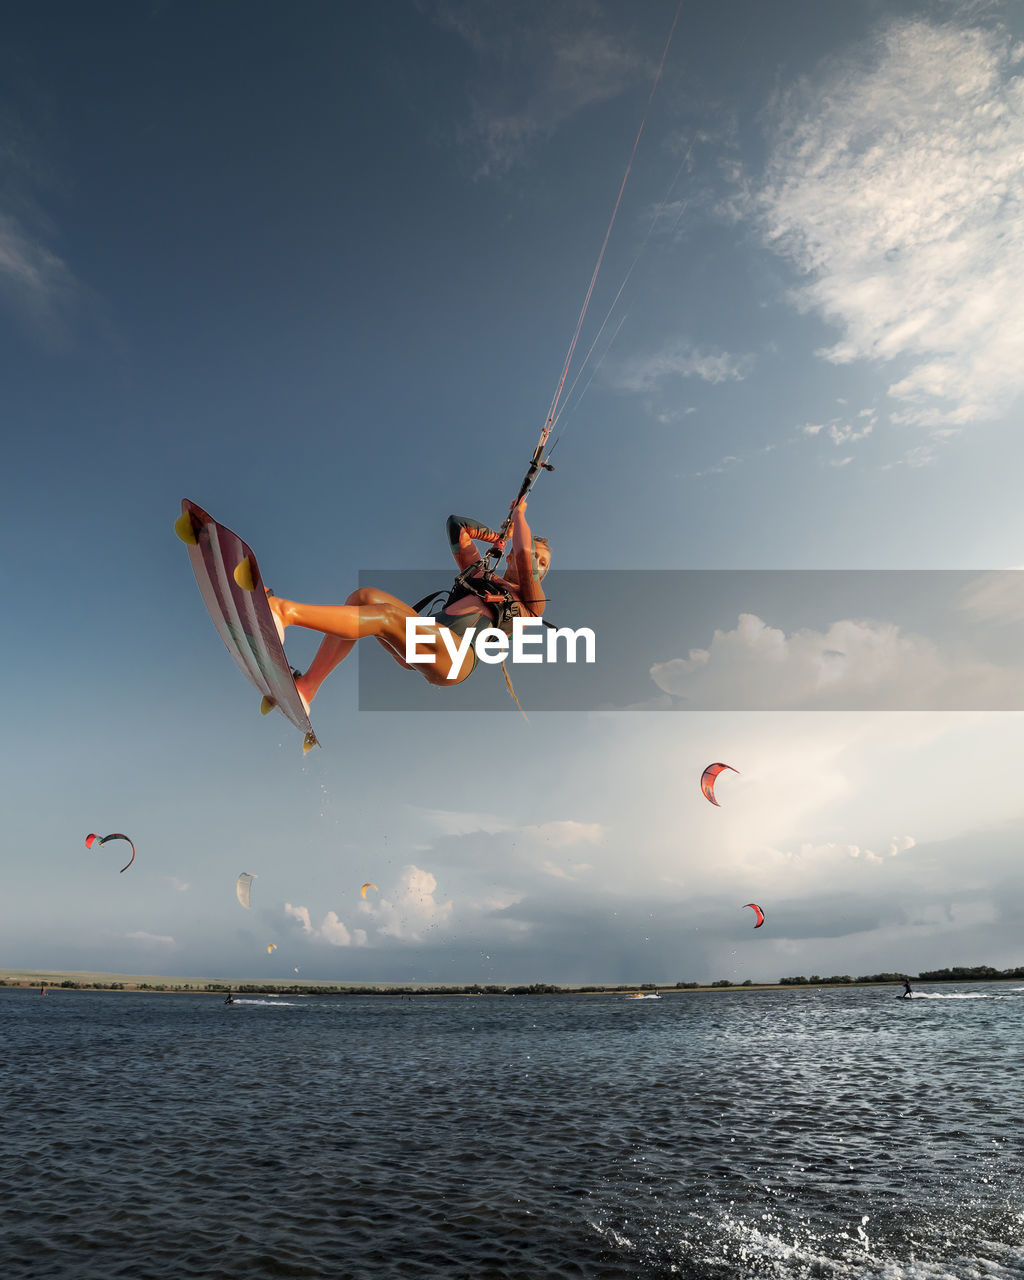 Professional athlete kitesurfer young caucasian woman doing a trick in the air against the backdrop 